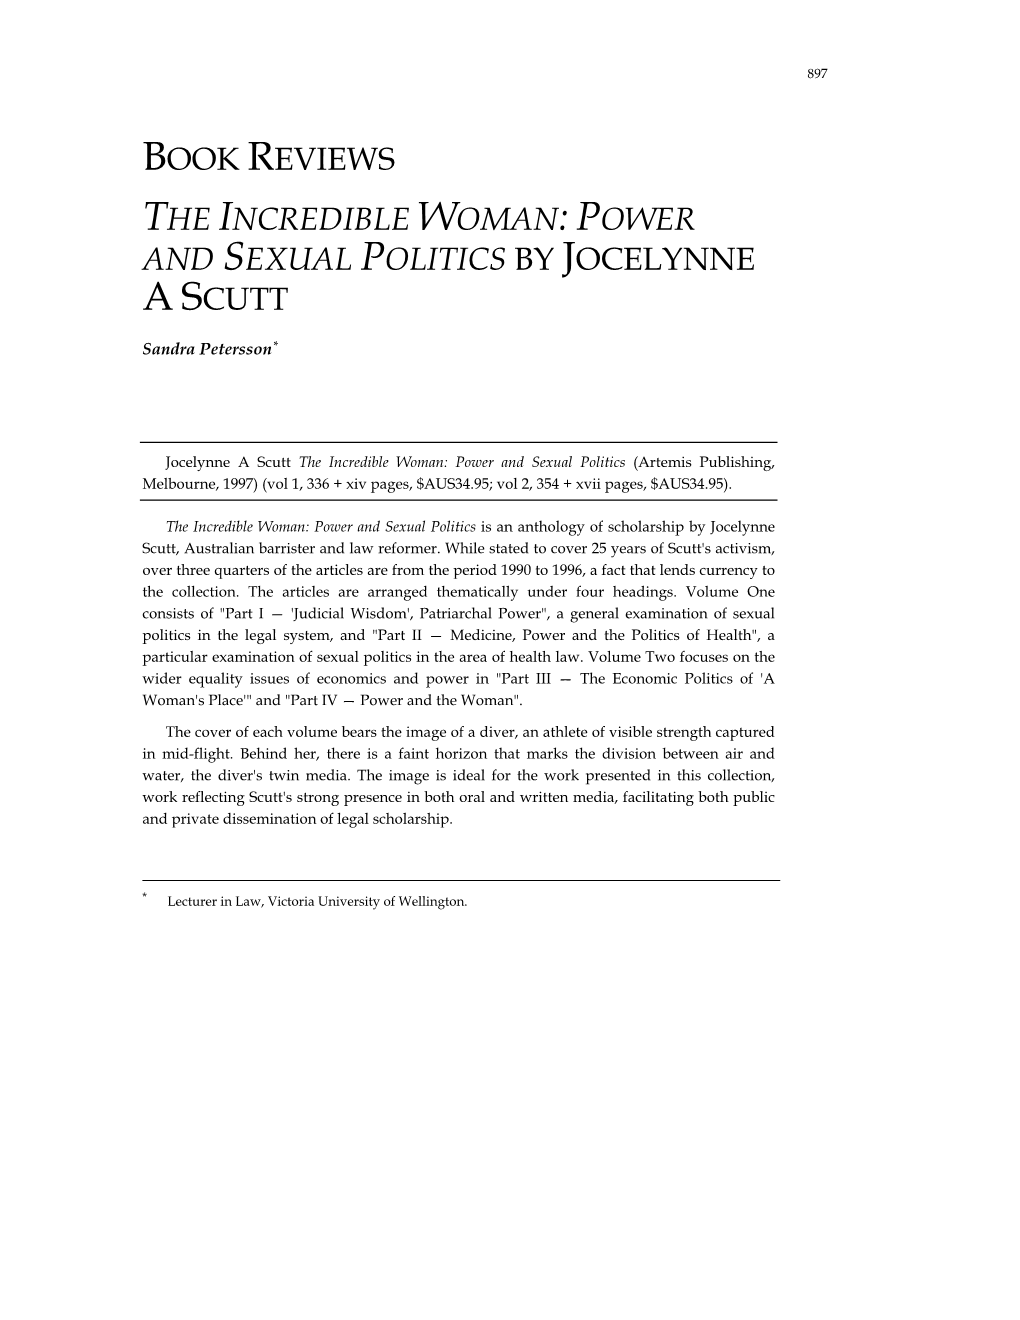 The Incredible Woman: Power and Sexual Politics by Jocelynne a Scutt